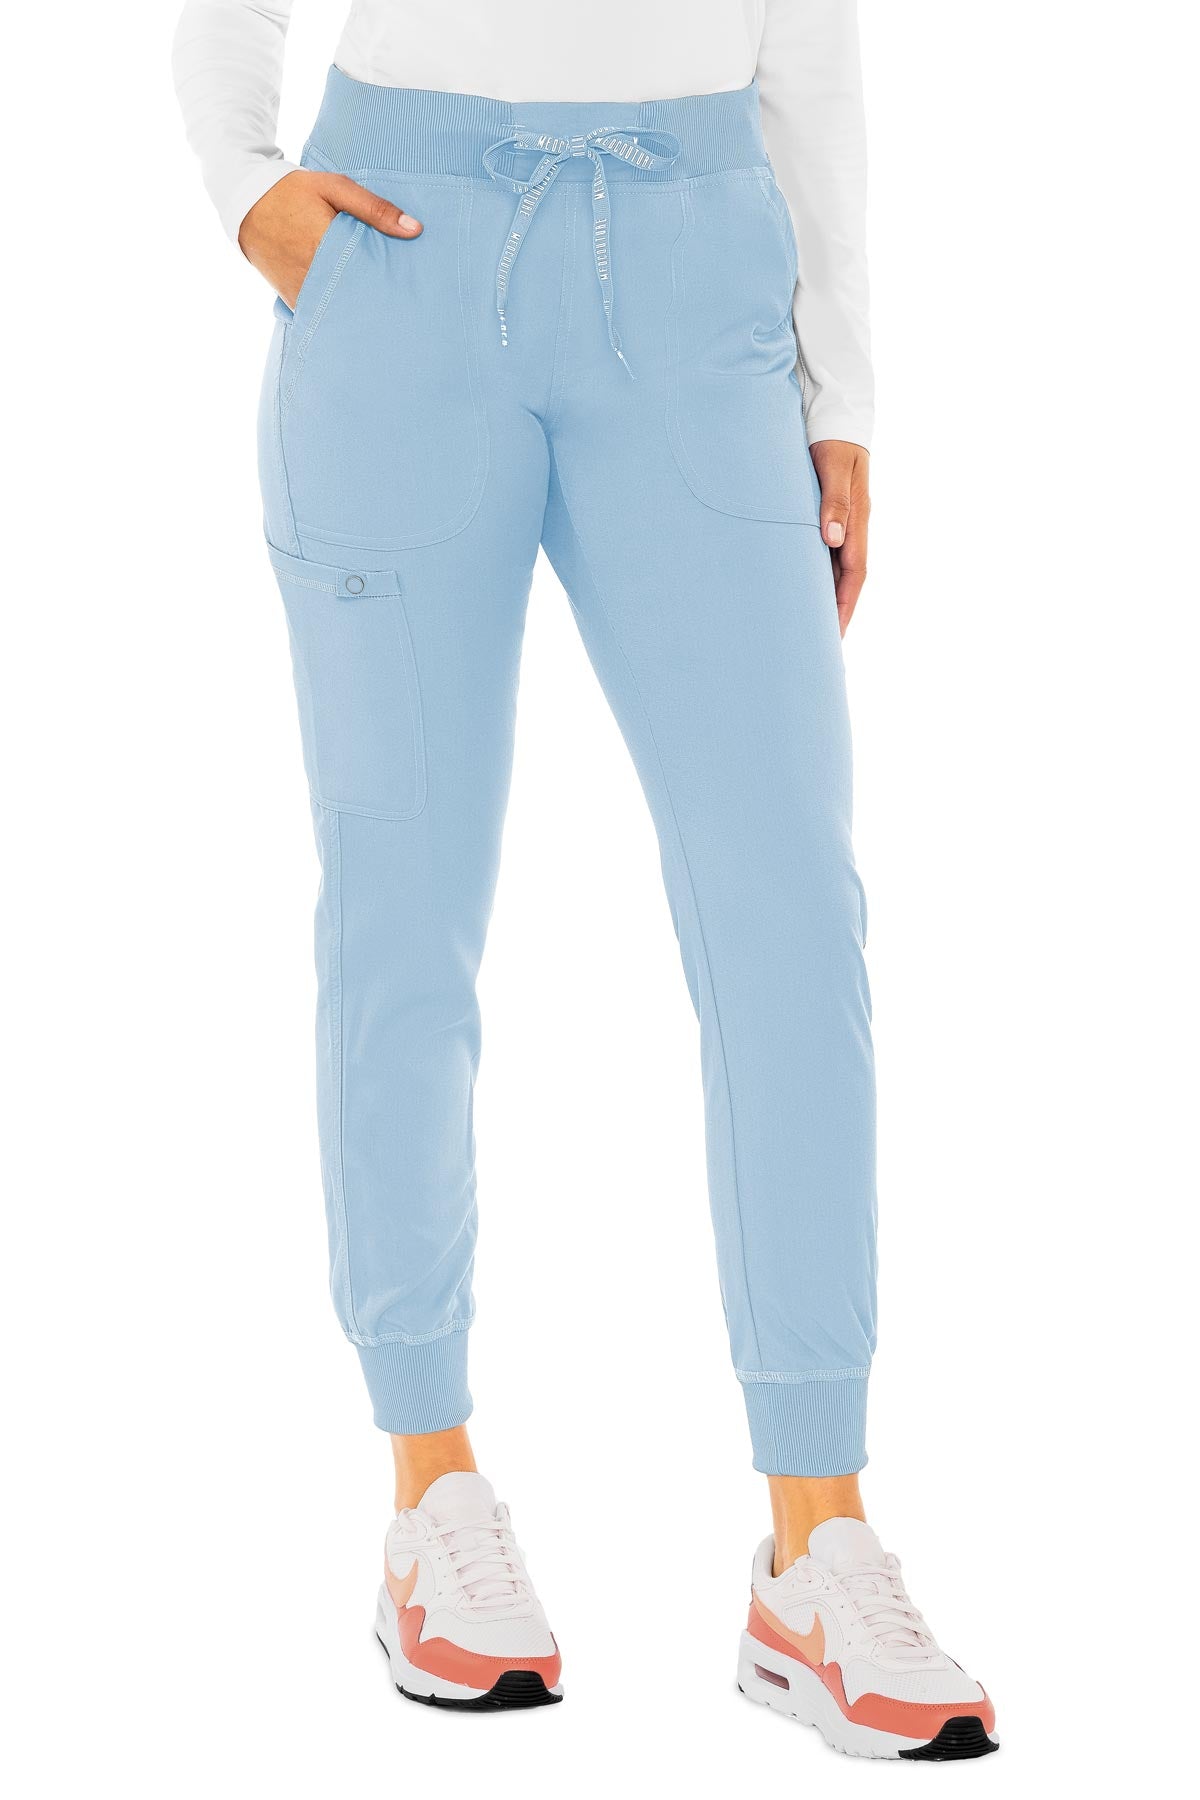 Med Couture Periwinkle PANT